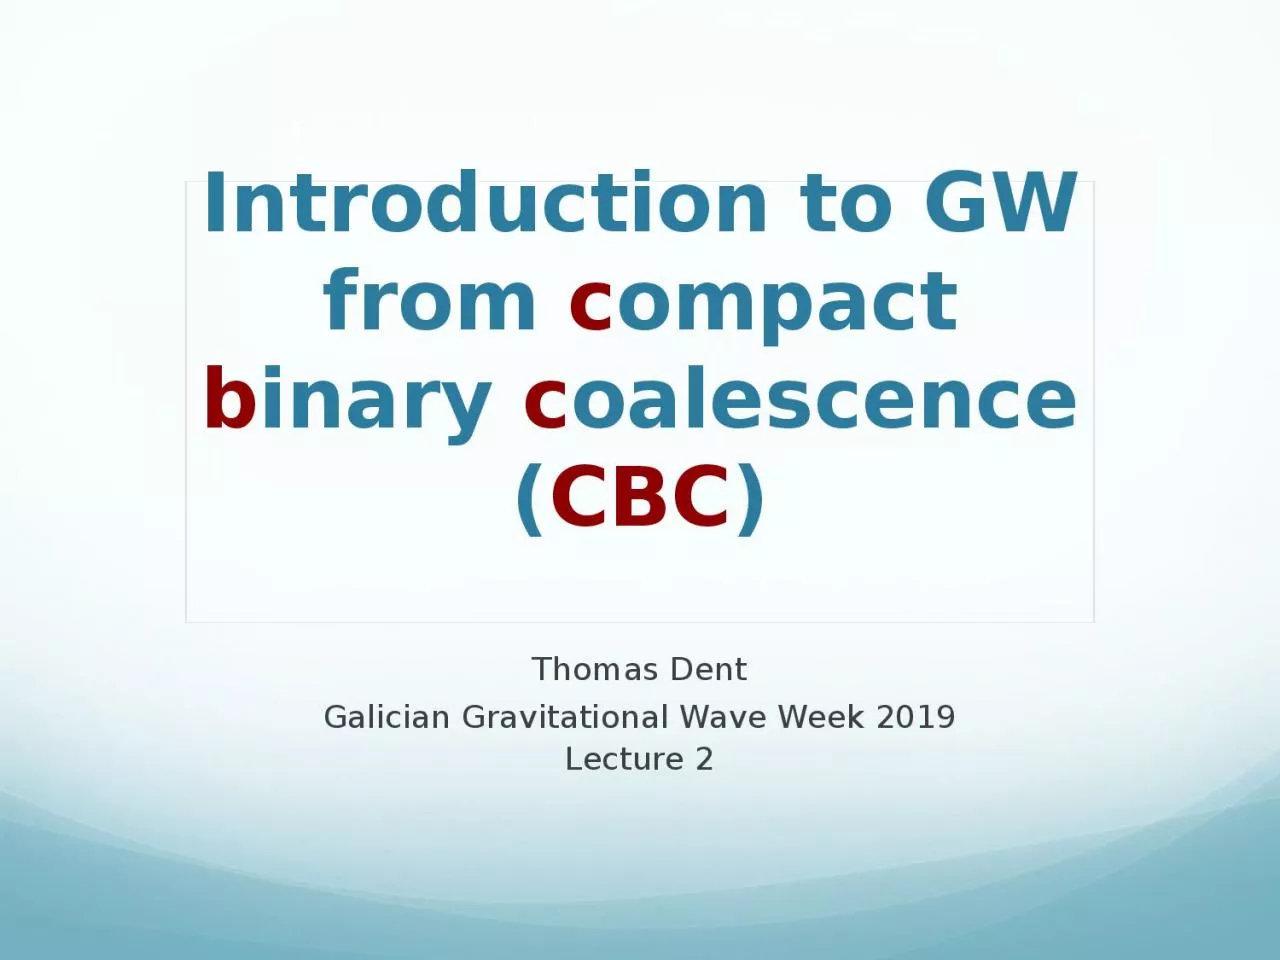 Introduction to GW from